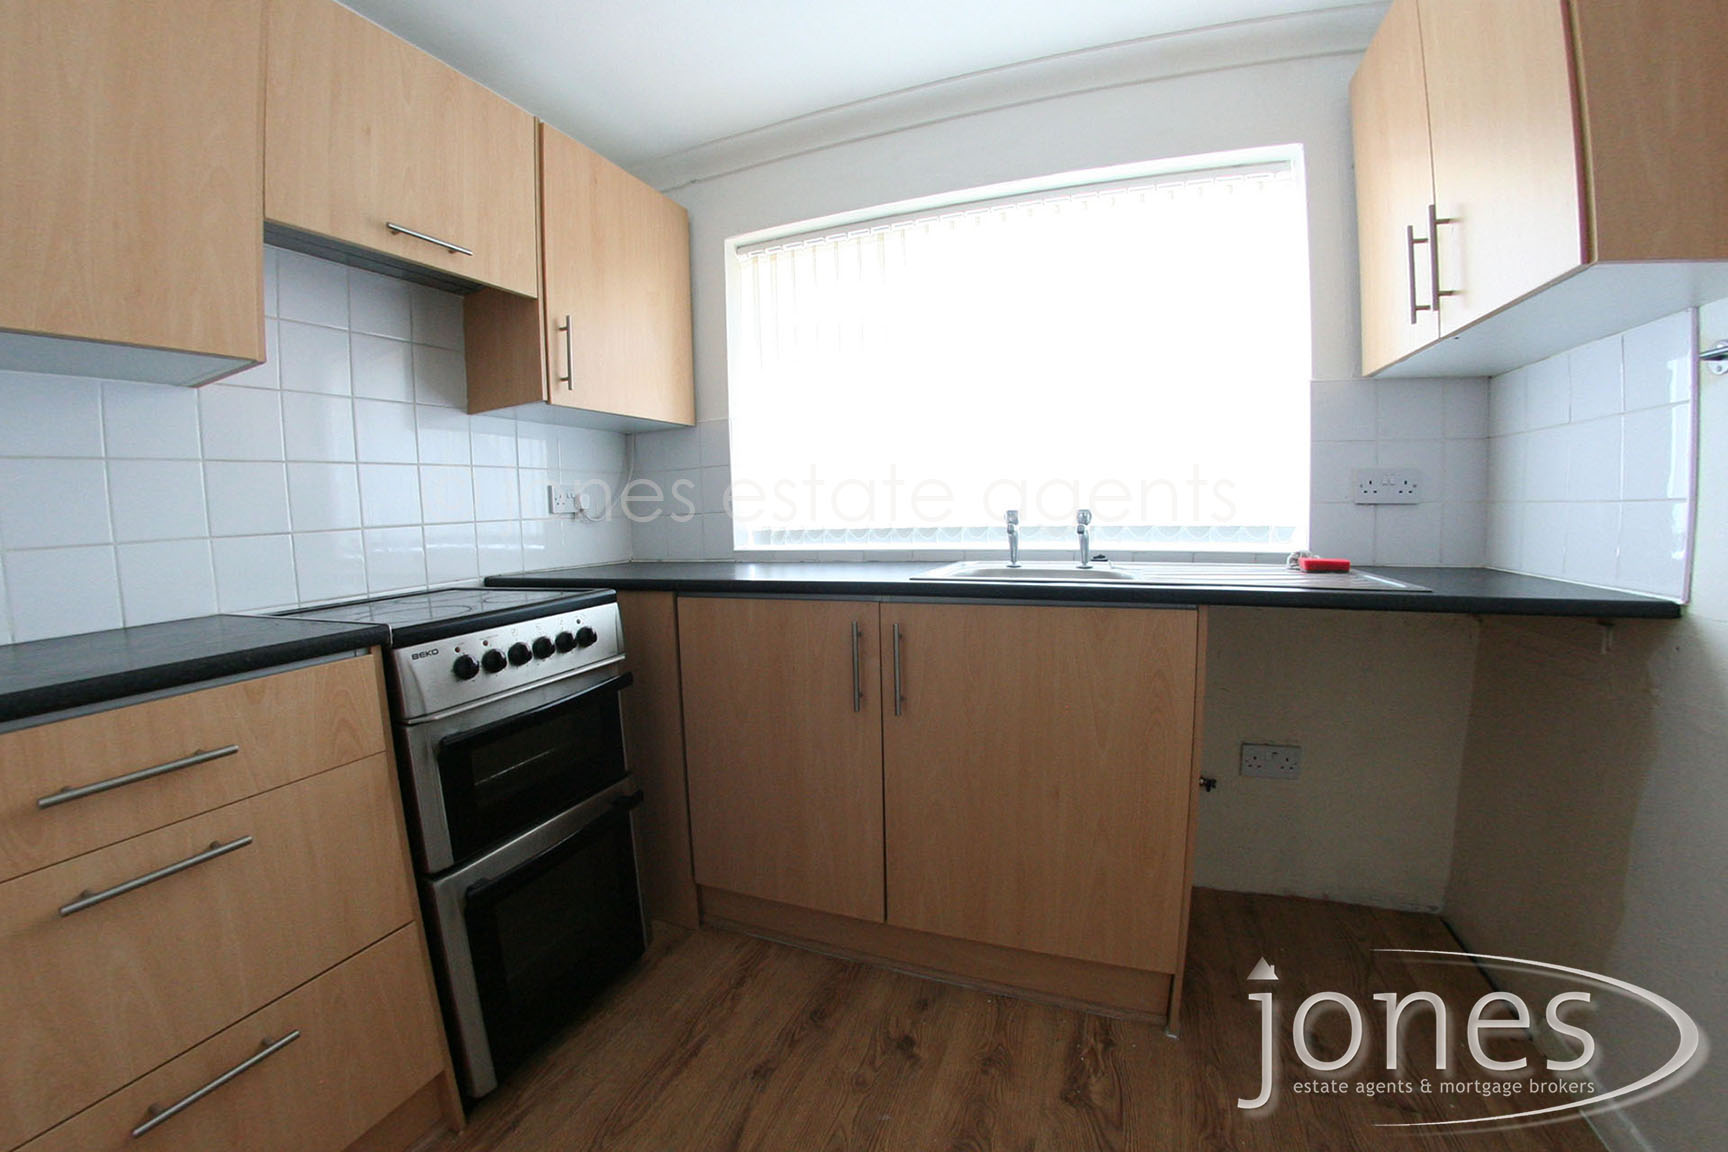 Home for Sale Let - Photo 04 North Road West, Wingate, TS28 5AP